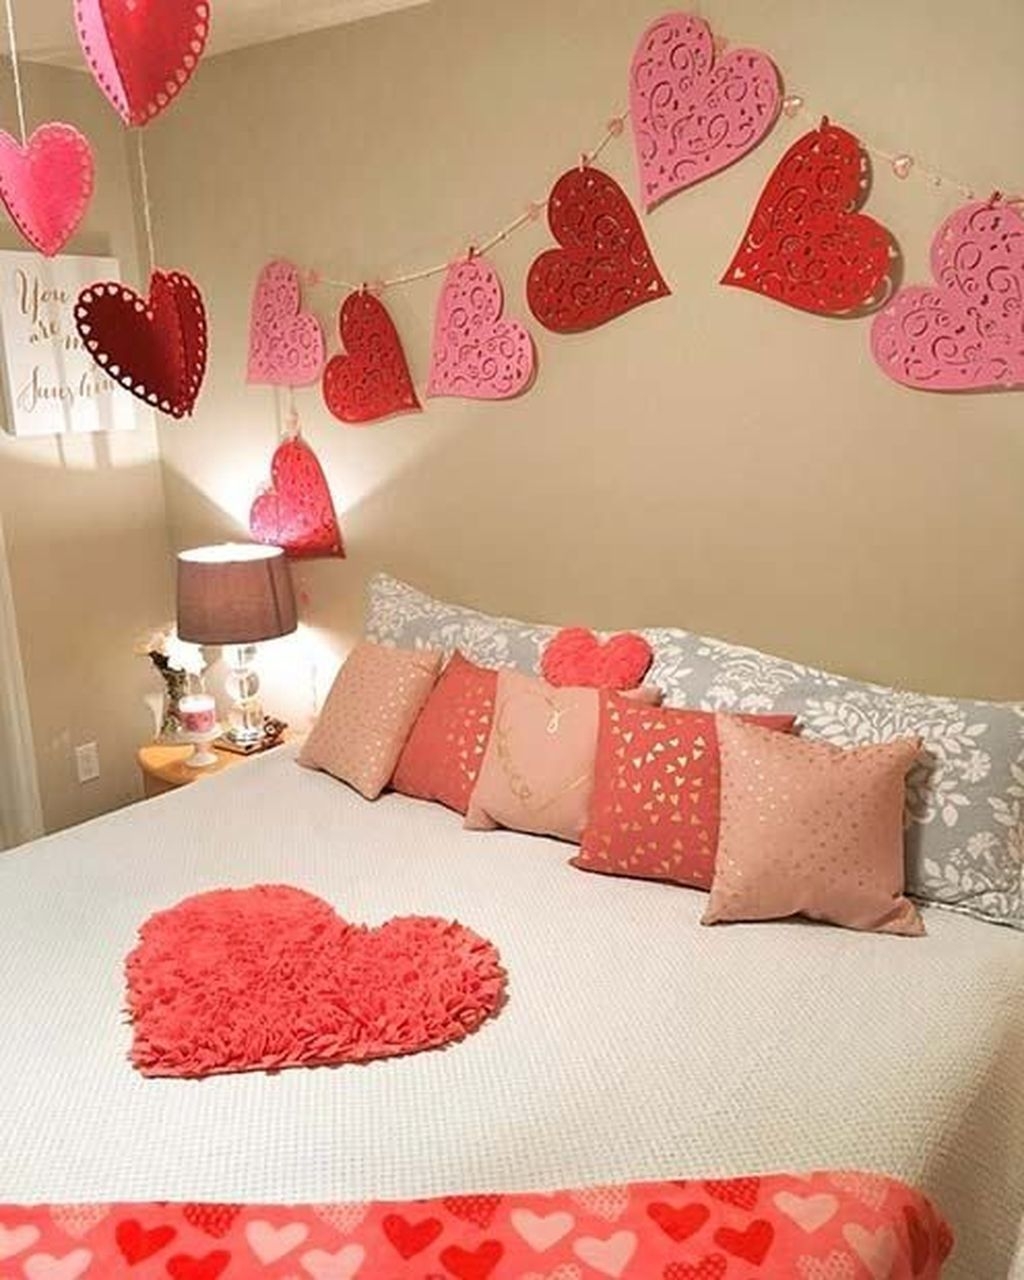 Beautiful Home Interior Design Ideas With The Concept Of Valentines Day02